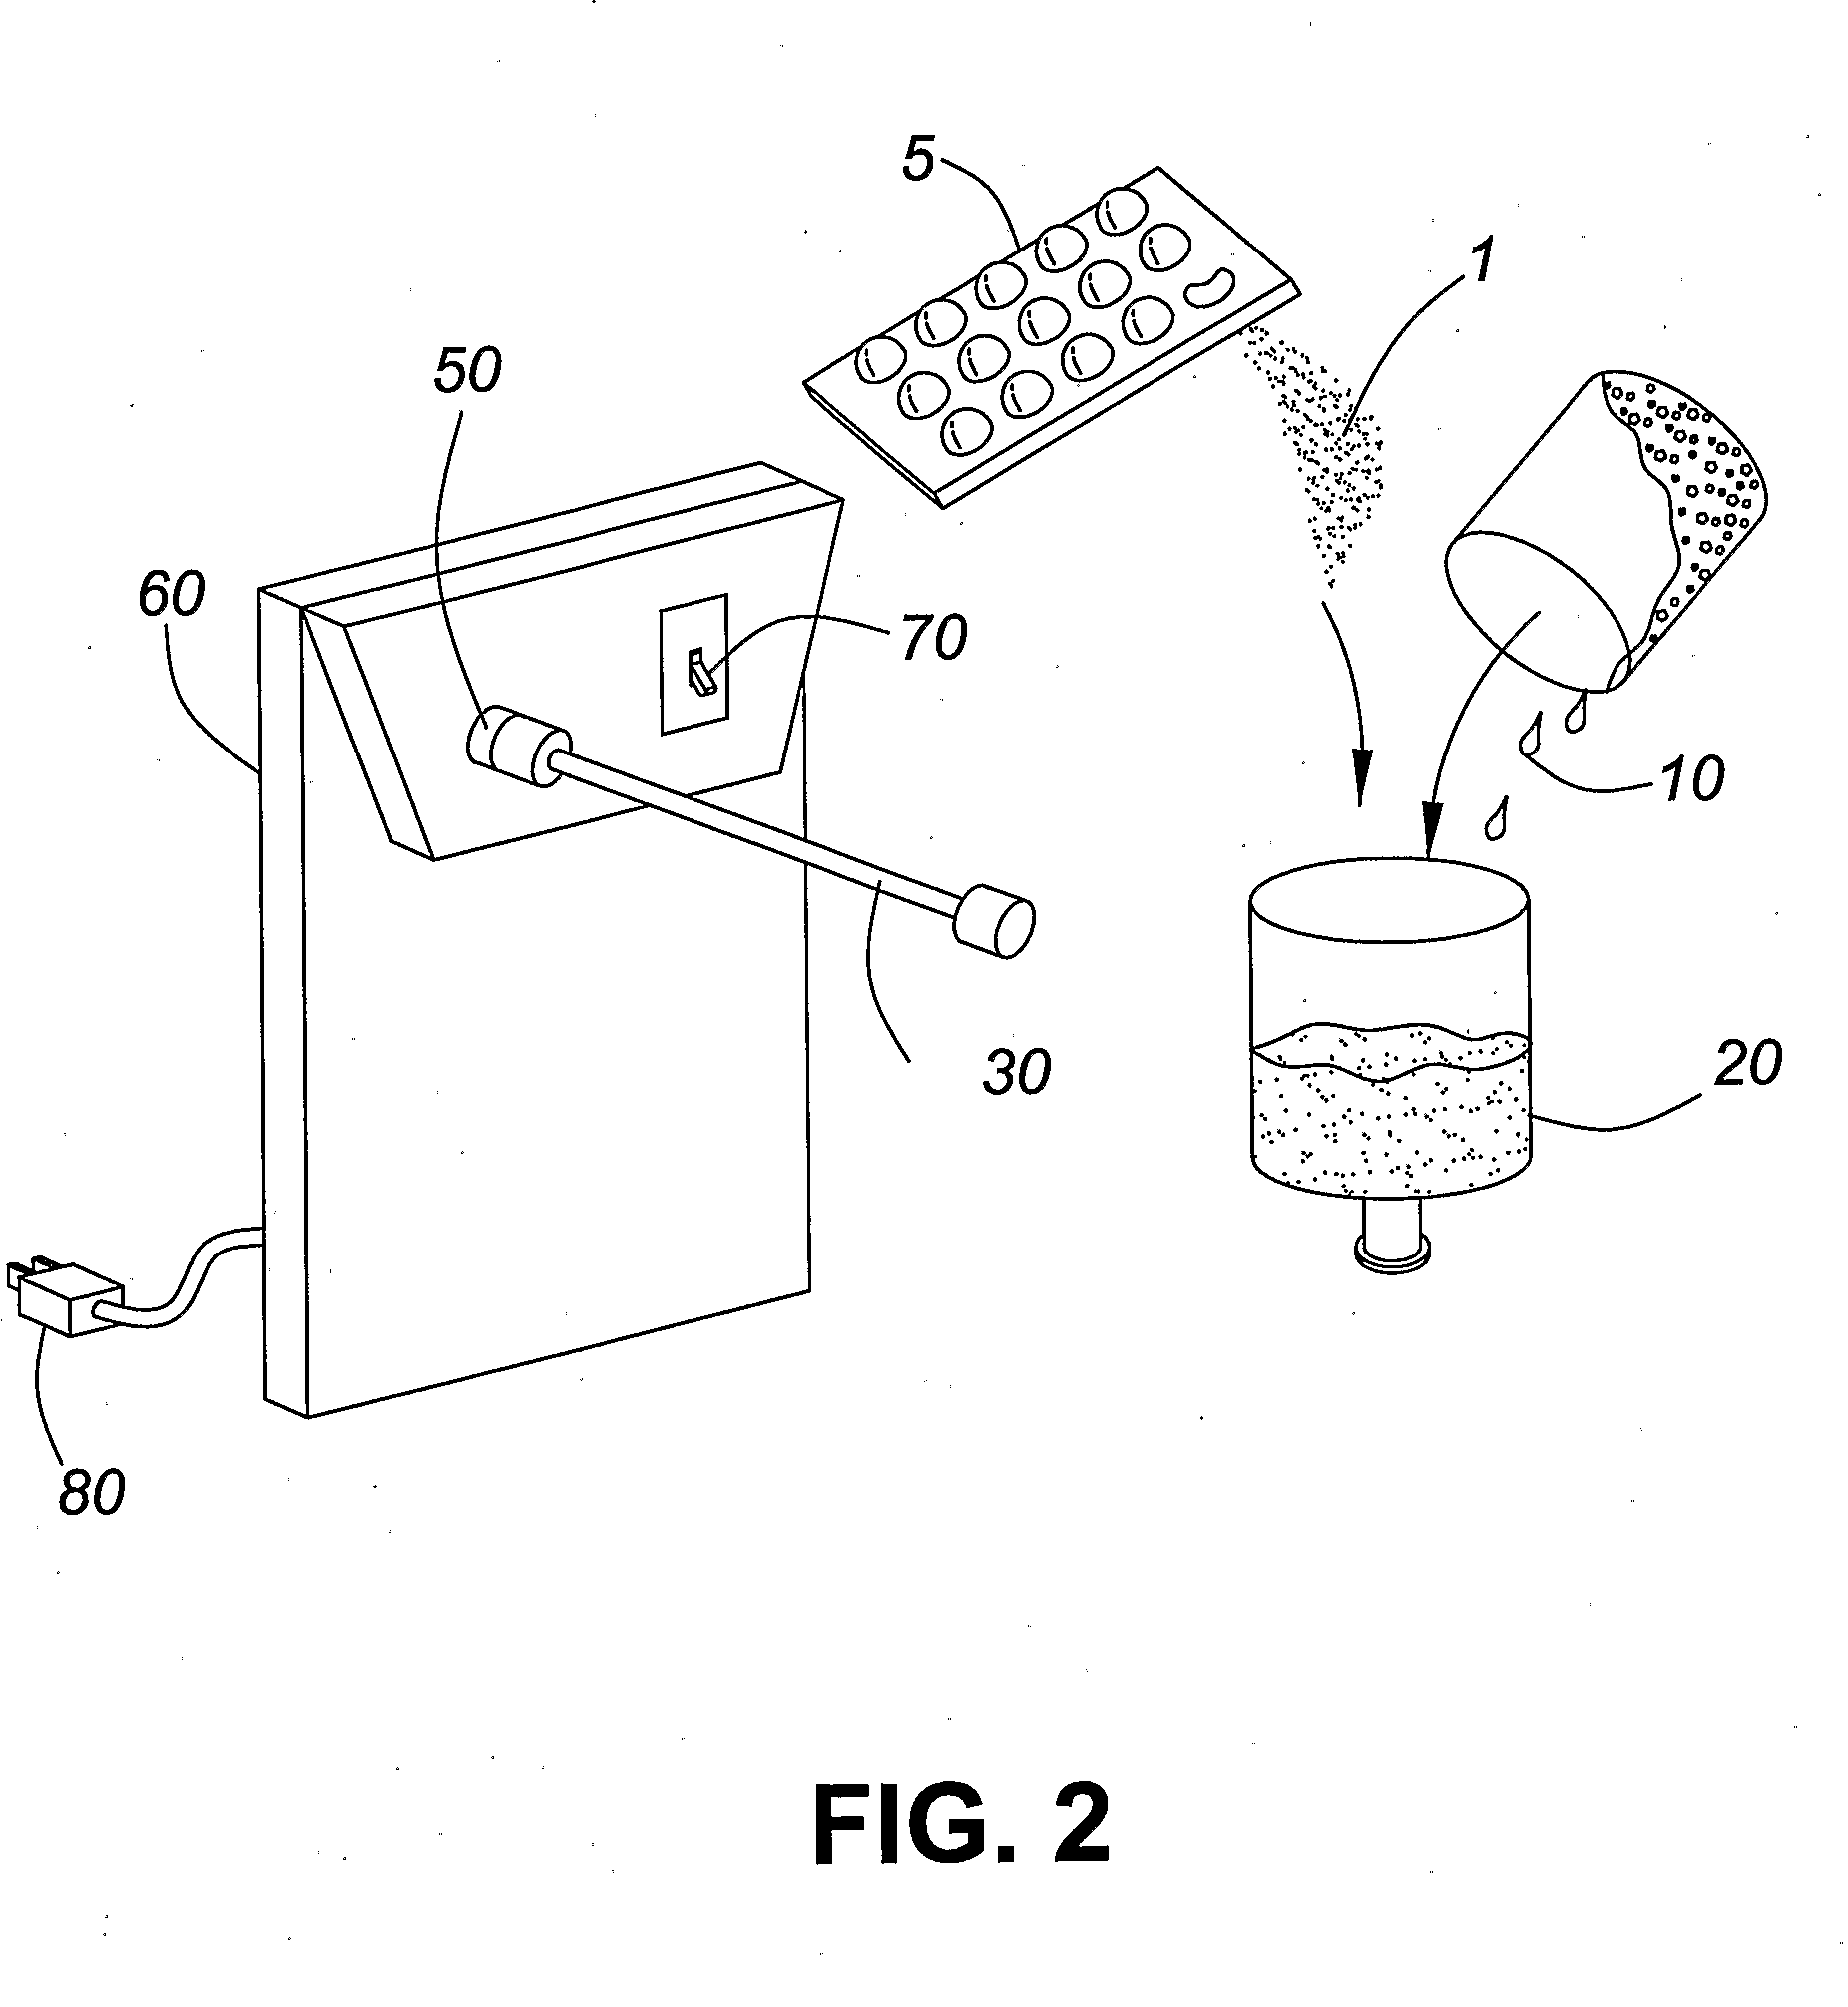 Method for Administering Formoterol Using a Nebulizer